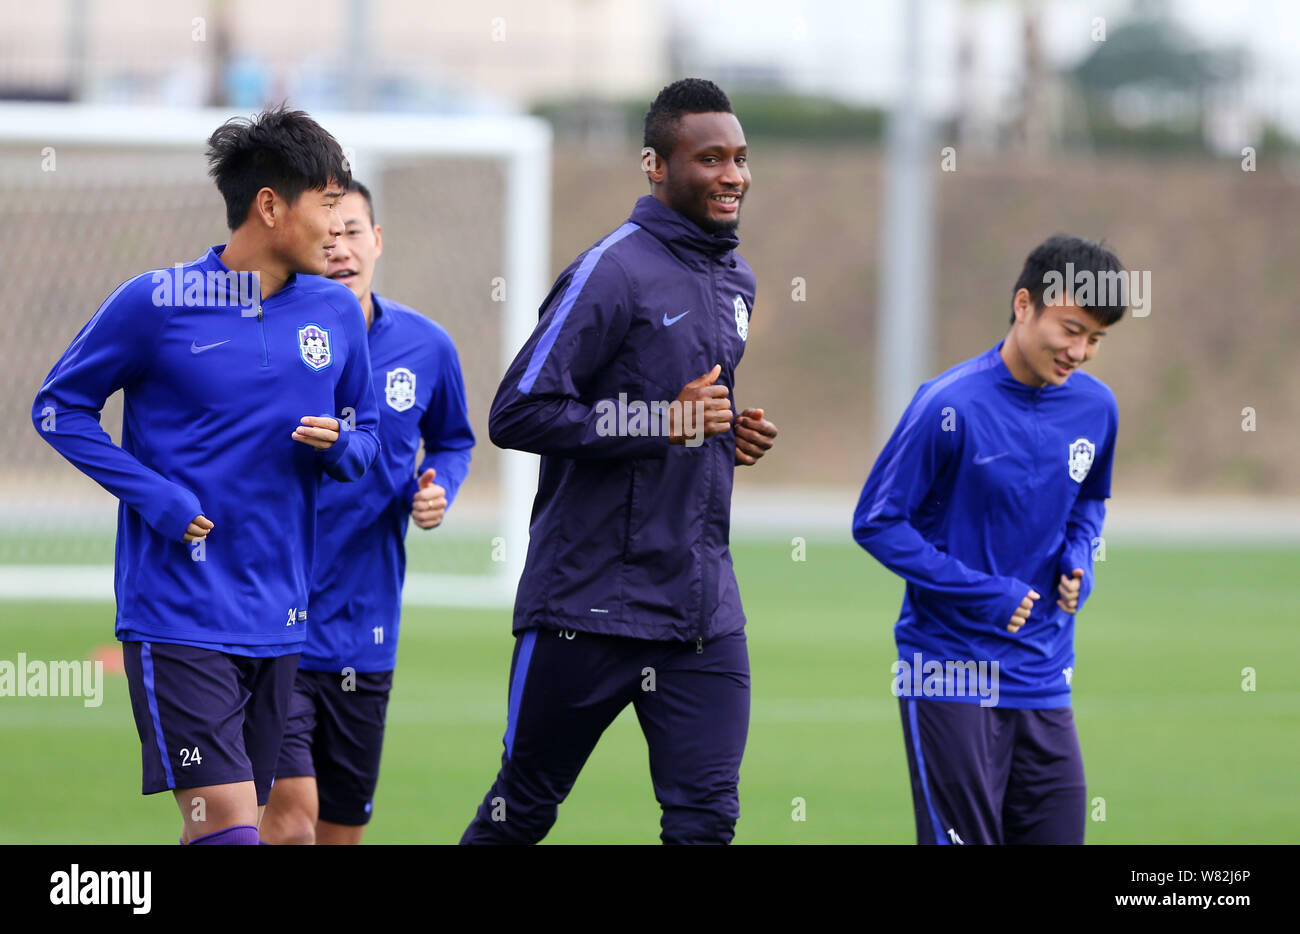 Nigerian football player John Obi Mikel, center, and other players of Tianjin TEDA F.C. take part in a training session in Okinawa, Japan, 15 February Stock Photo